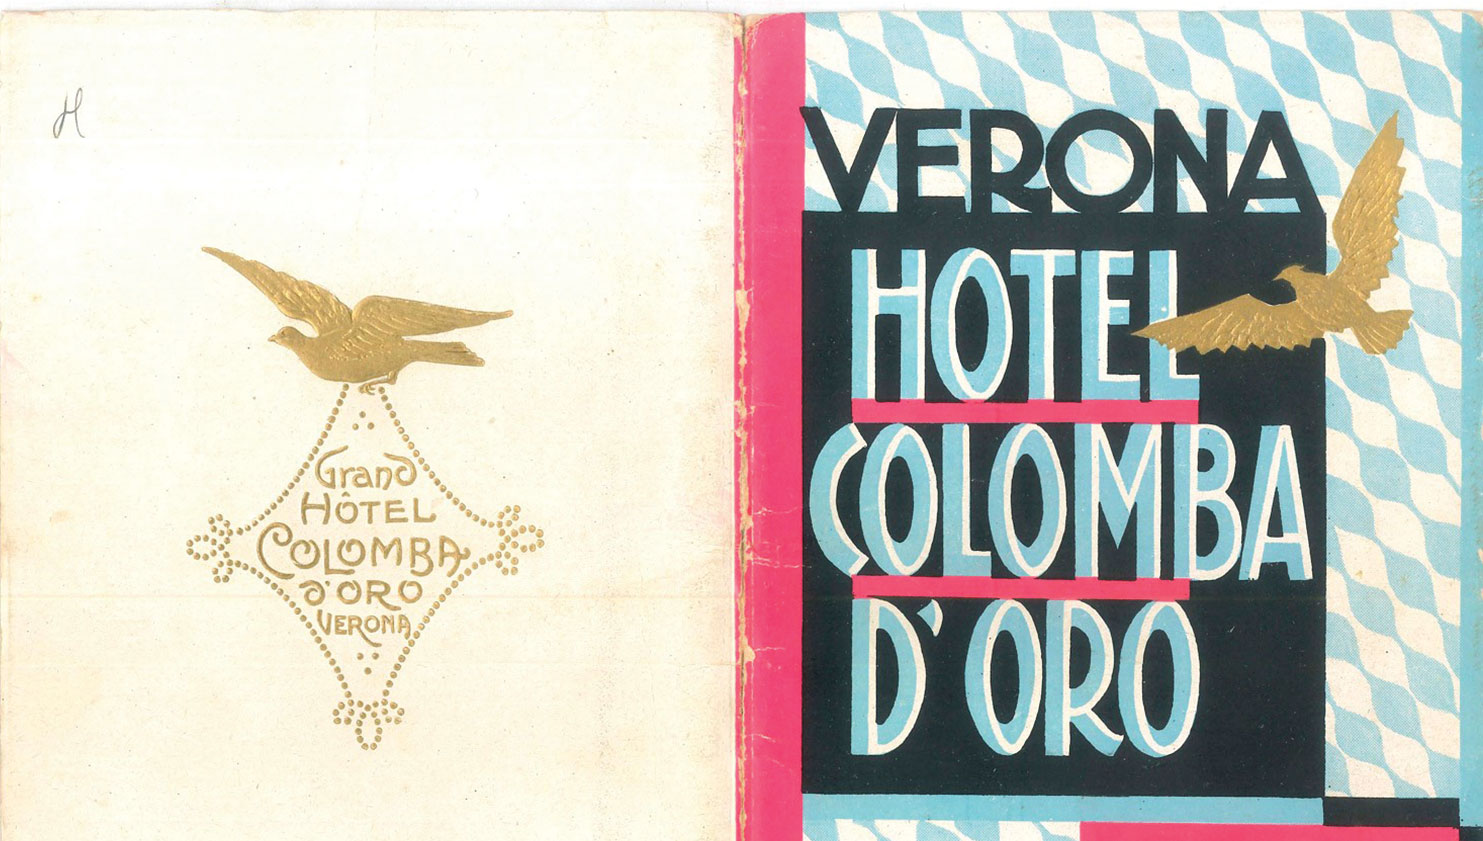 Vintage posters of Hotel Colomba d'Oro, Verona